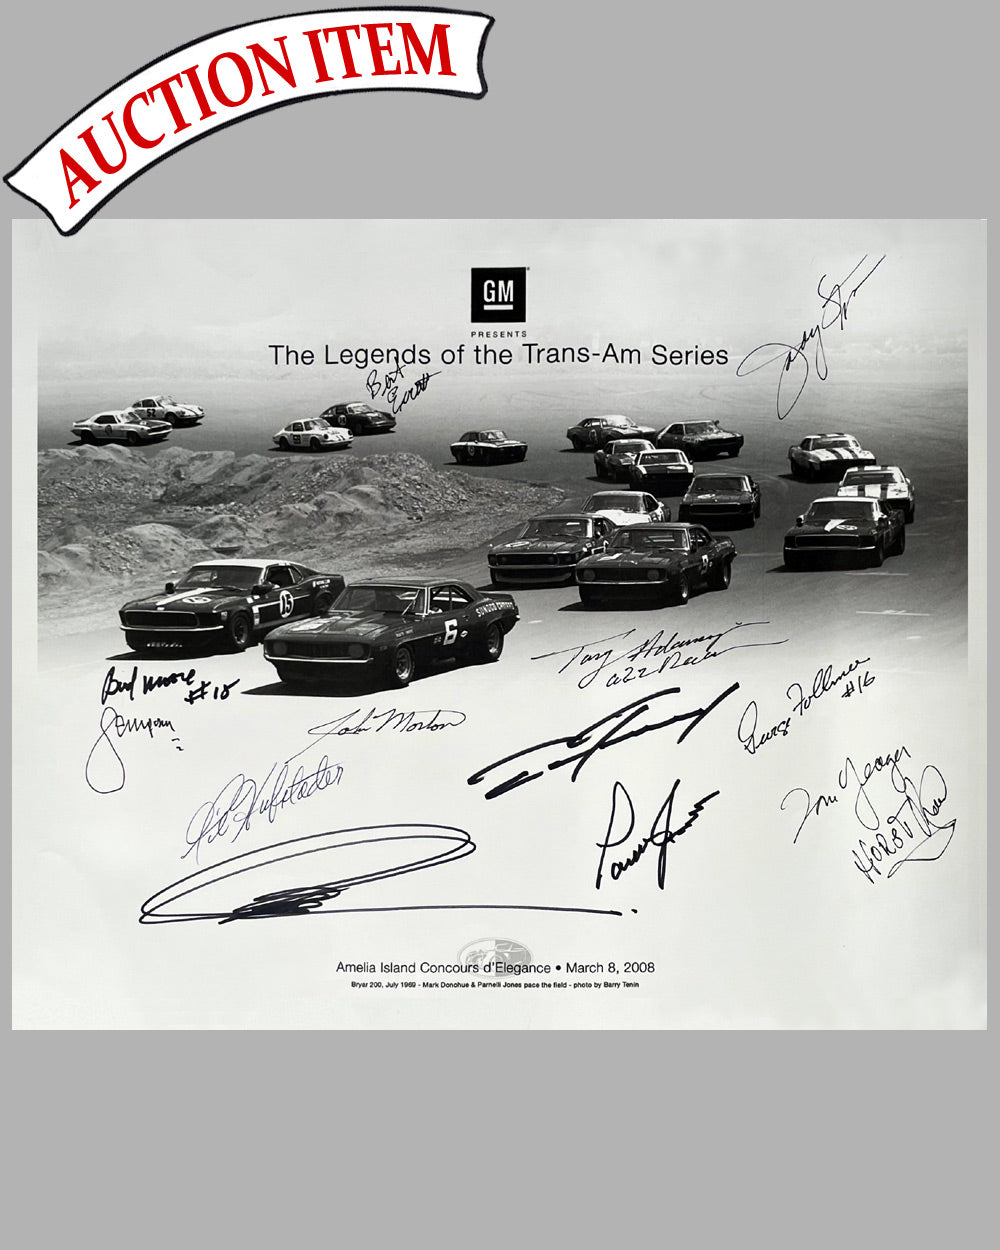 The Legends of the Trans Am series print photographed by Barry Tenin, autographed by many drivers